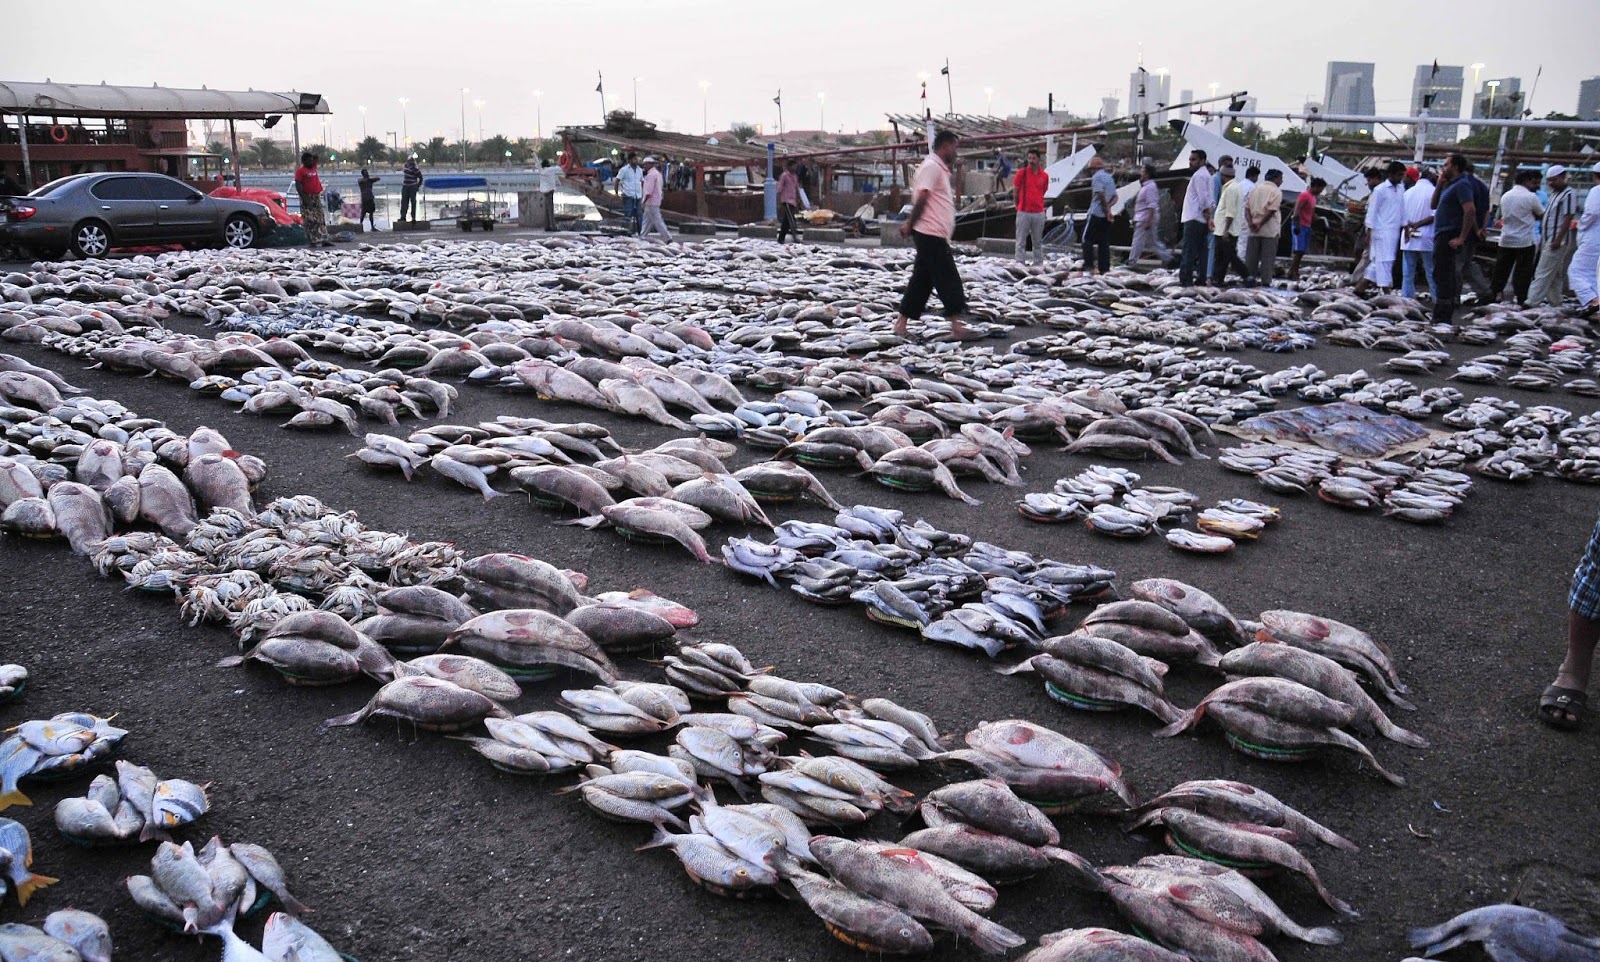 World’s biggest fish farm launched in Abu Dhabi